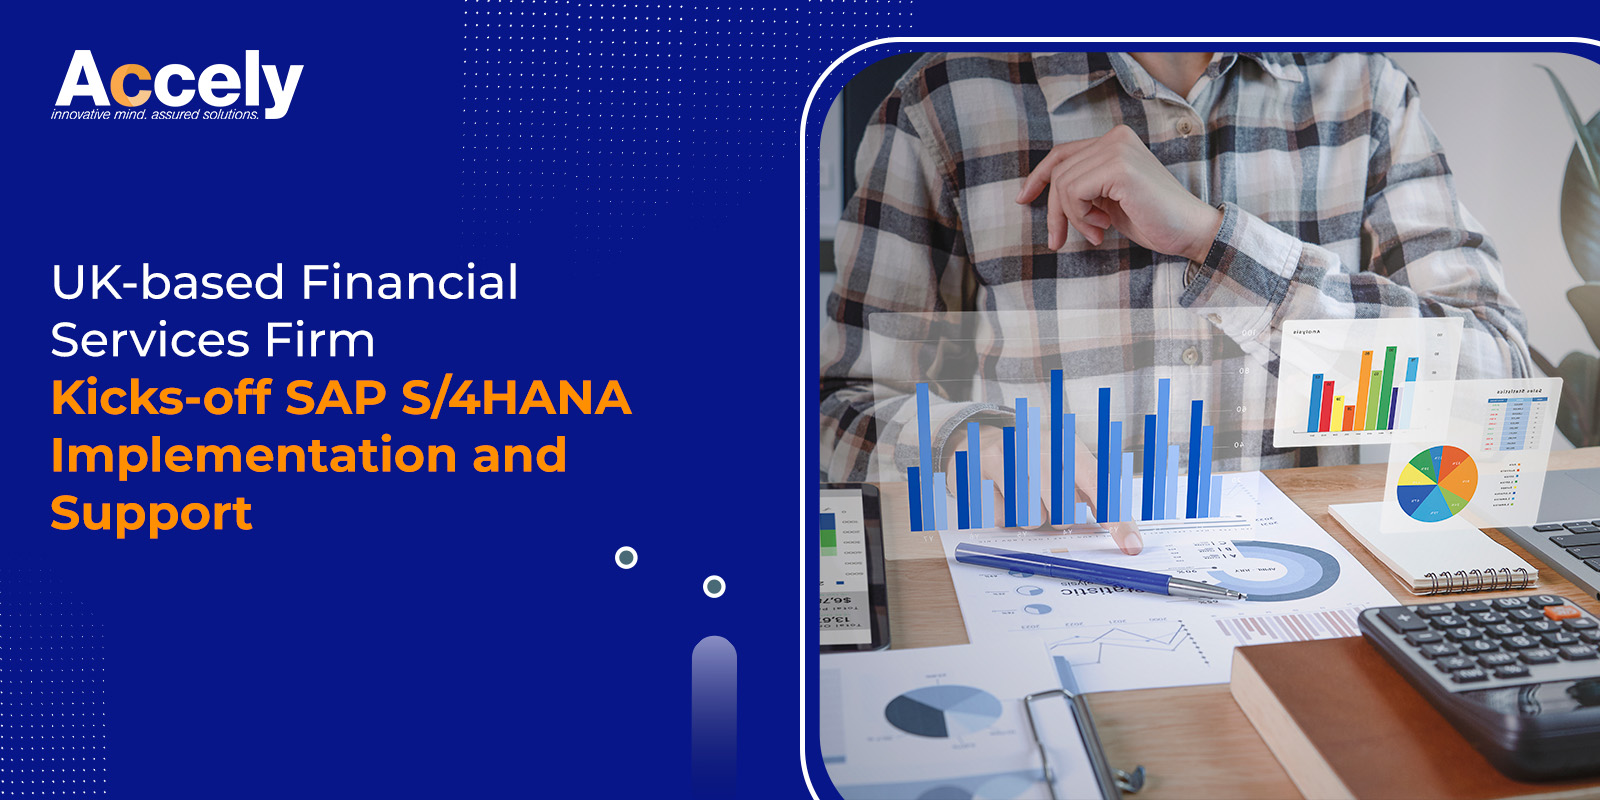 UK-based Financial Services Firm Kicks-off SAP S/4HANA Implementation and Support